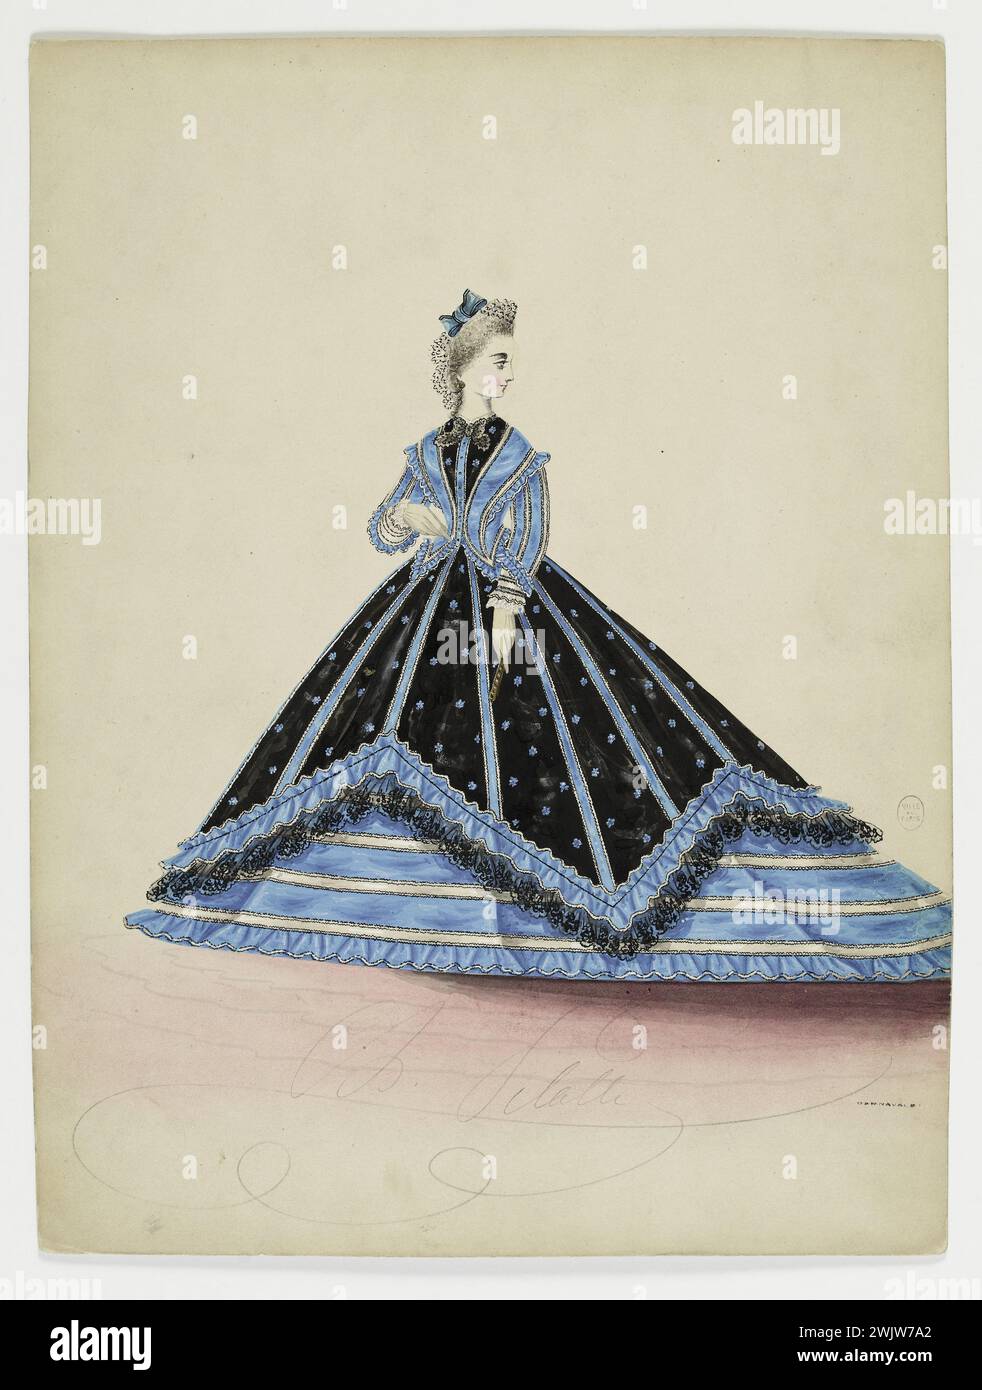 Charles Pilatte for the Ghys house. Model-figure for seamstress. City dress with buttoned jacket in front, Basques with tips, bordered with blue steering wheel, first black skirt with blue floral patterns and blue bias cut in teeth bordered with black lace ruffles, second blue skirt with white stripes and blue steering wheel in white top , MADAME GHYS model. Watercolor on cardboard. 1860-1870. Galliera, fashion museum of the city of Paris. 37834-11 With an button jacket in front, watercolor on cardboard, Basque with tip, blue and bias, borde steering wheel black lace, blue flywheel, toothpage, Stock Photo